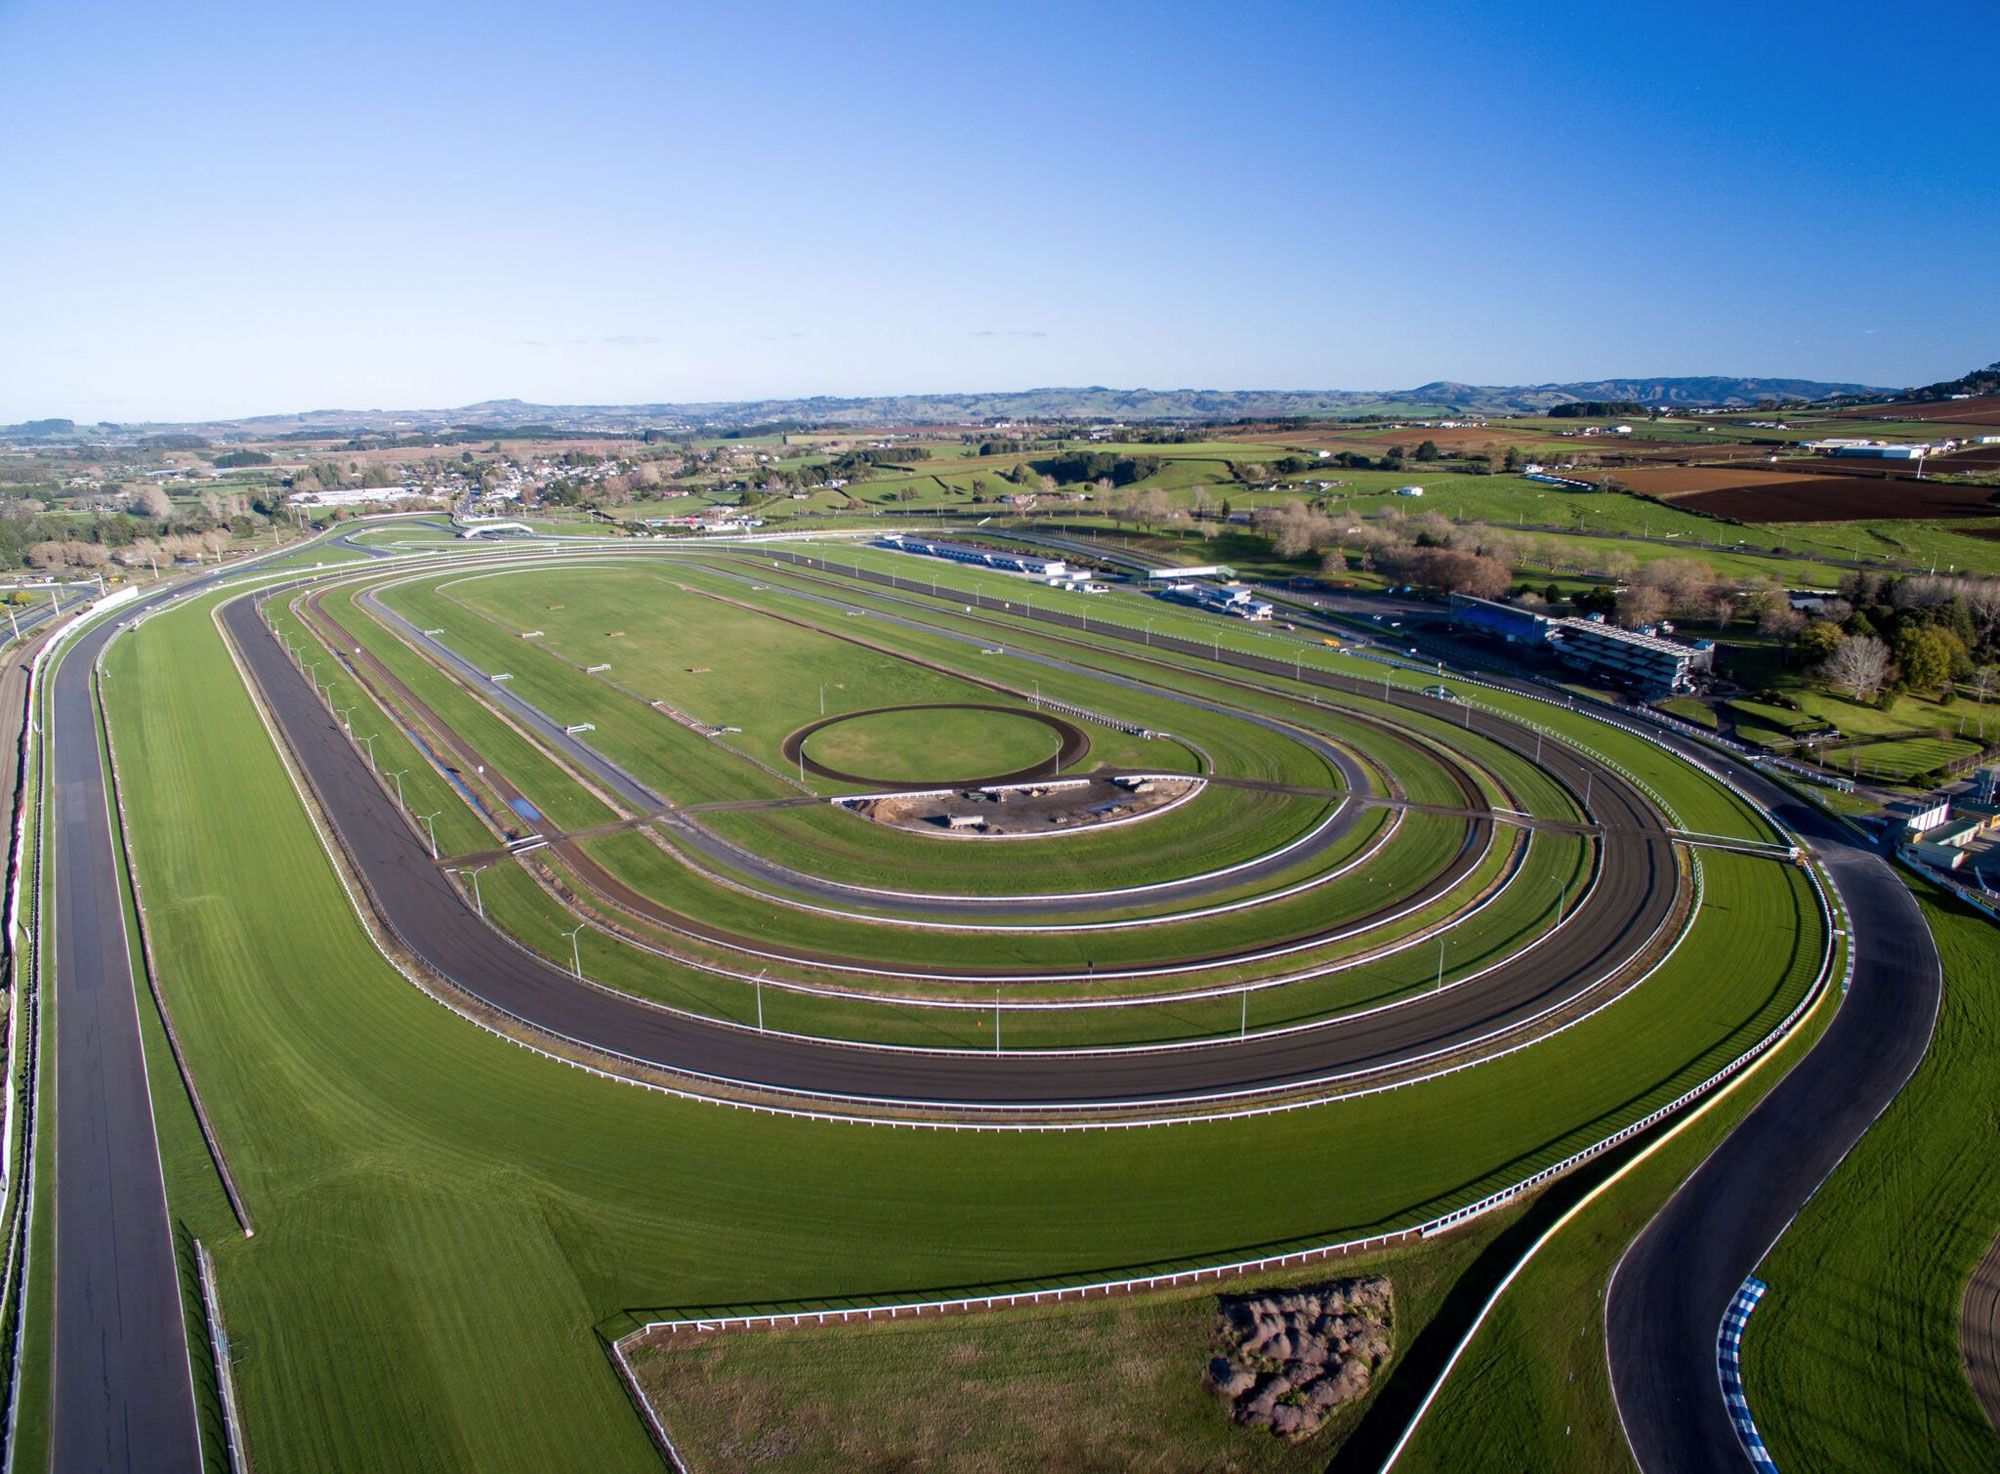 Campaign to immortalise iconic New Zealand race track in virtual world succeeds